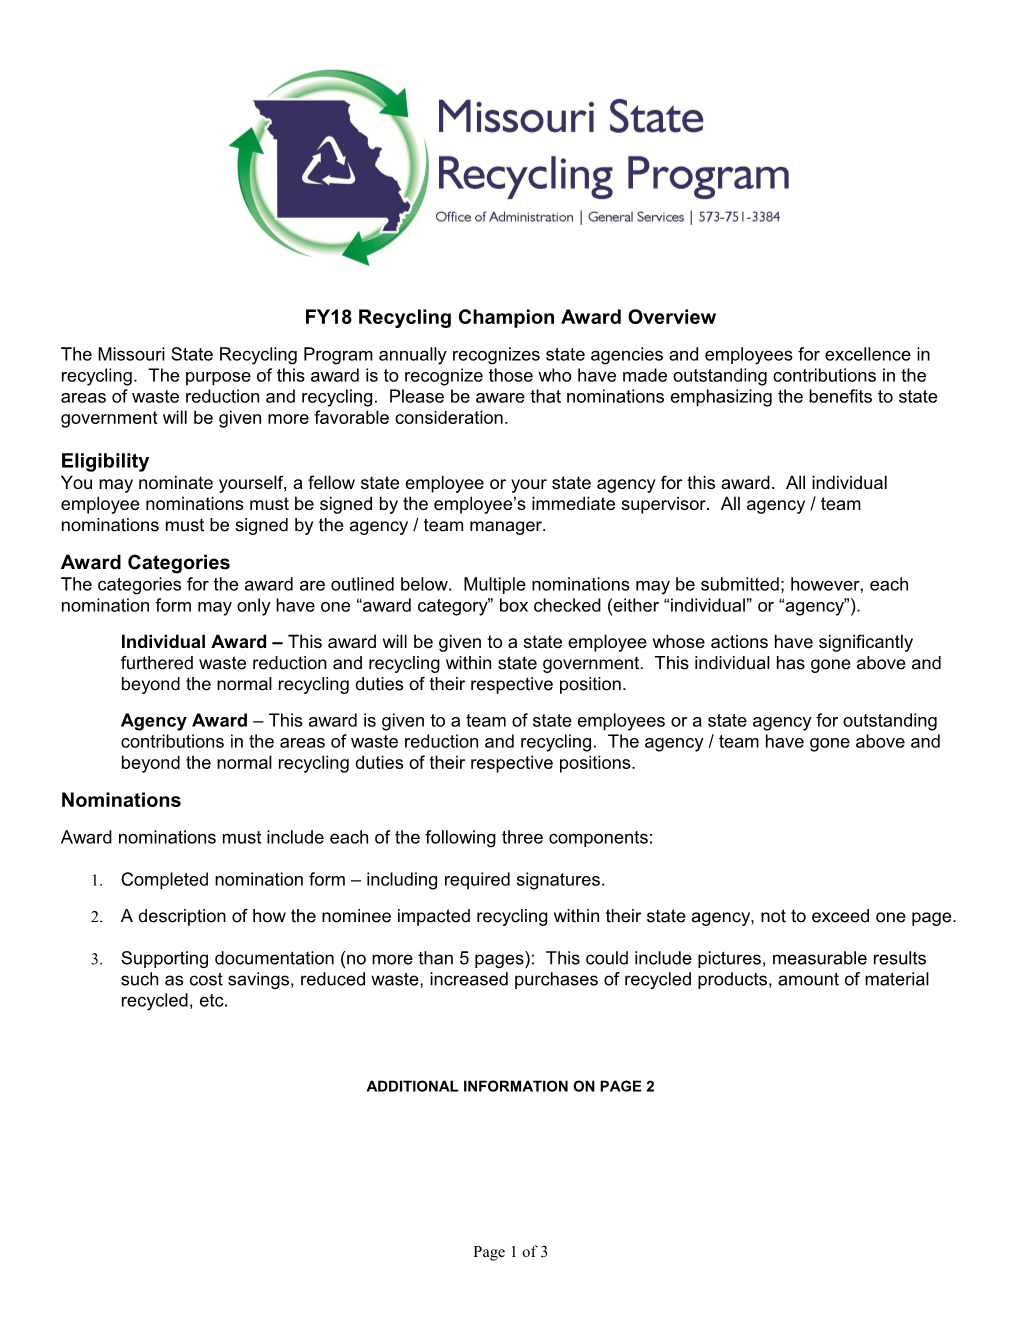 FY18 Recycling Champion Award Overview